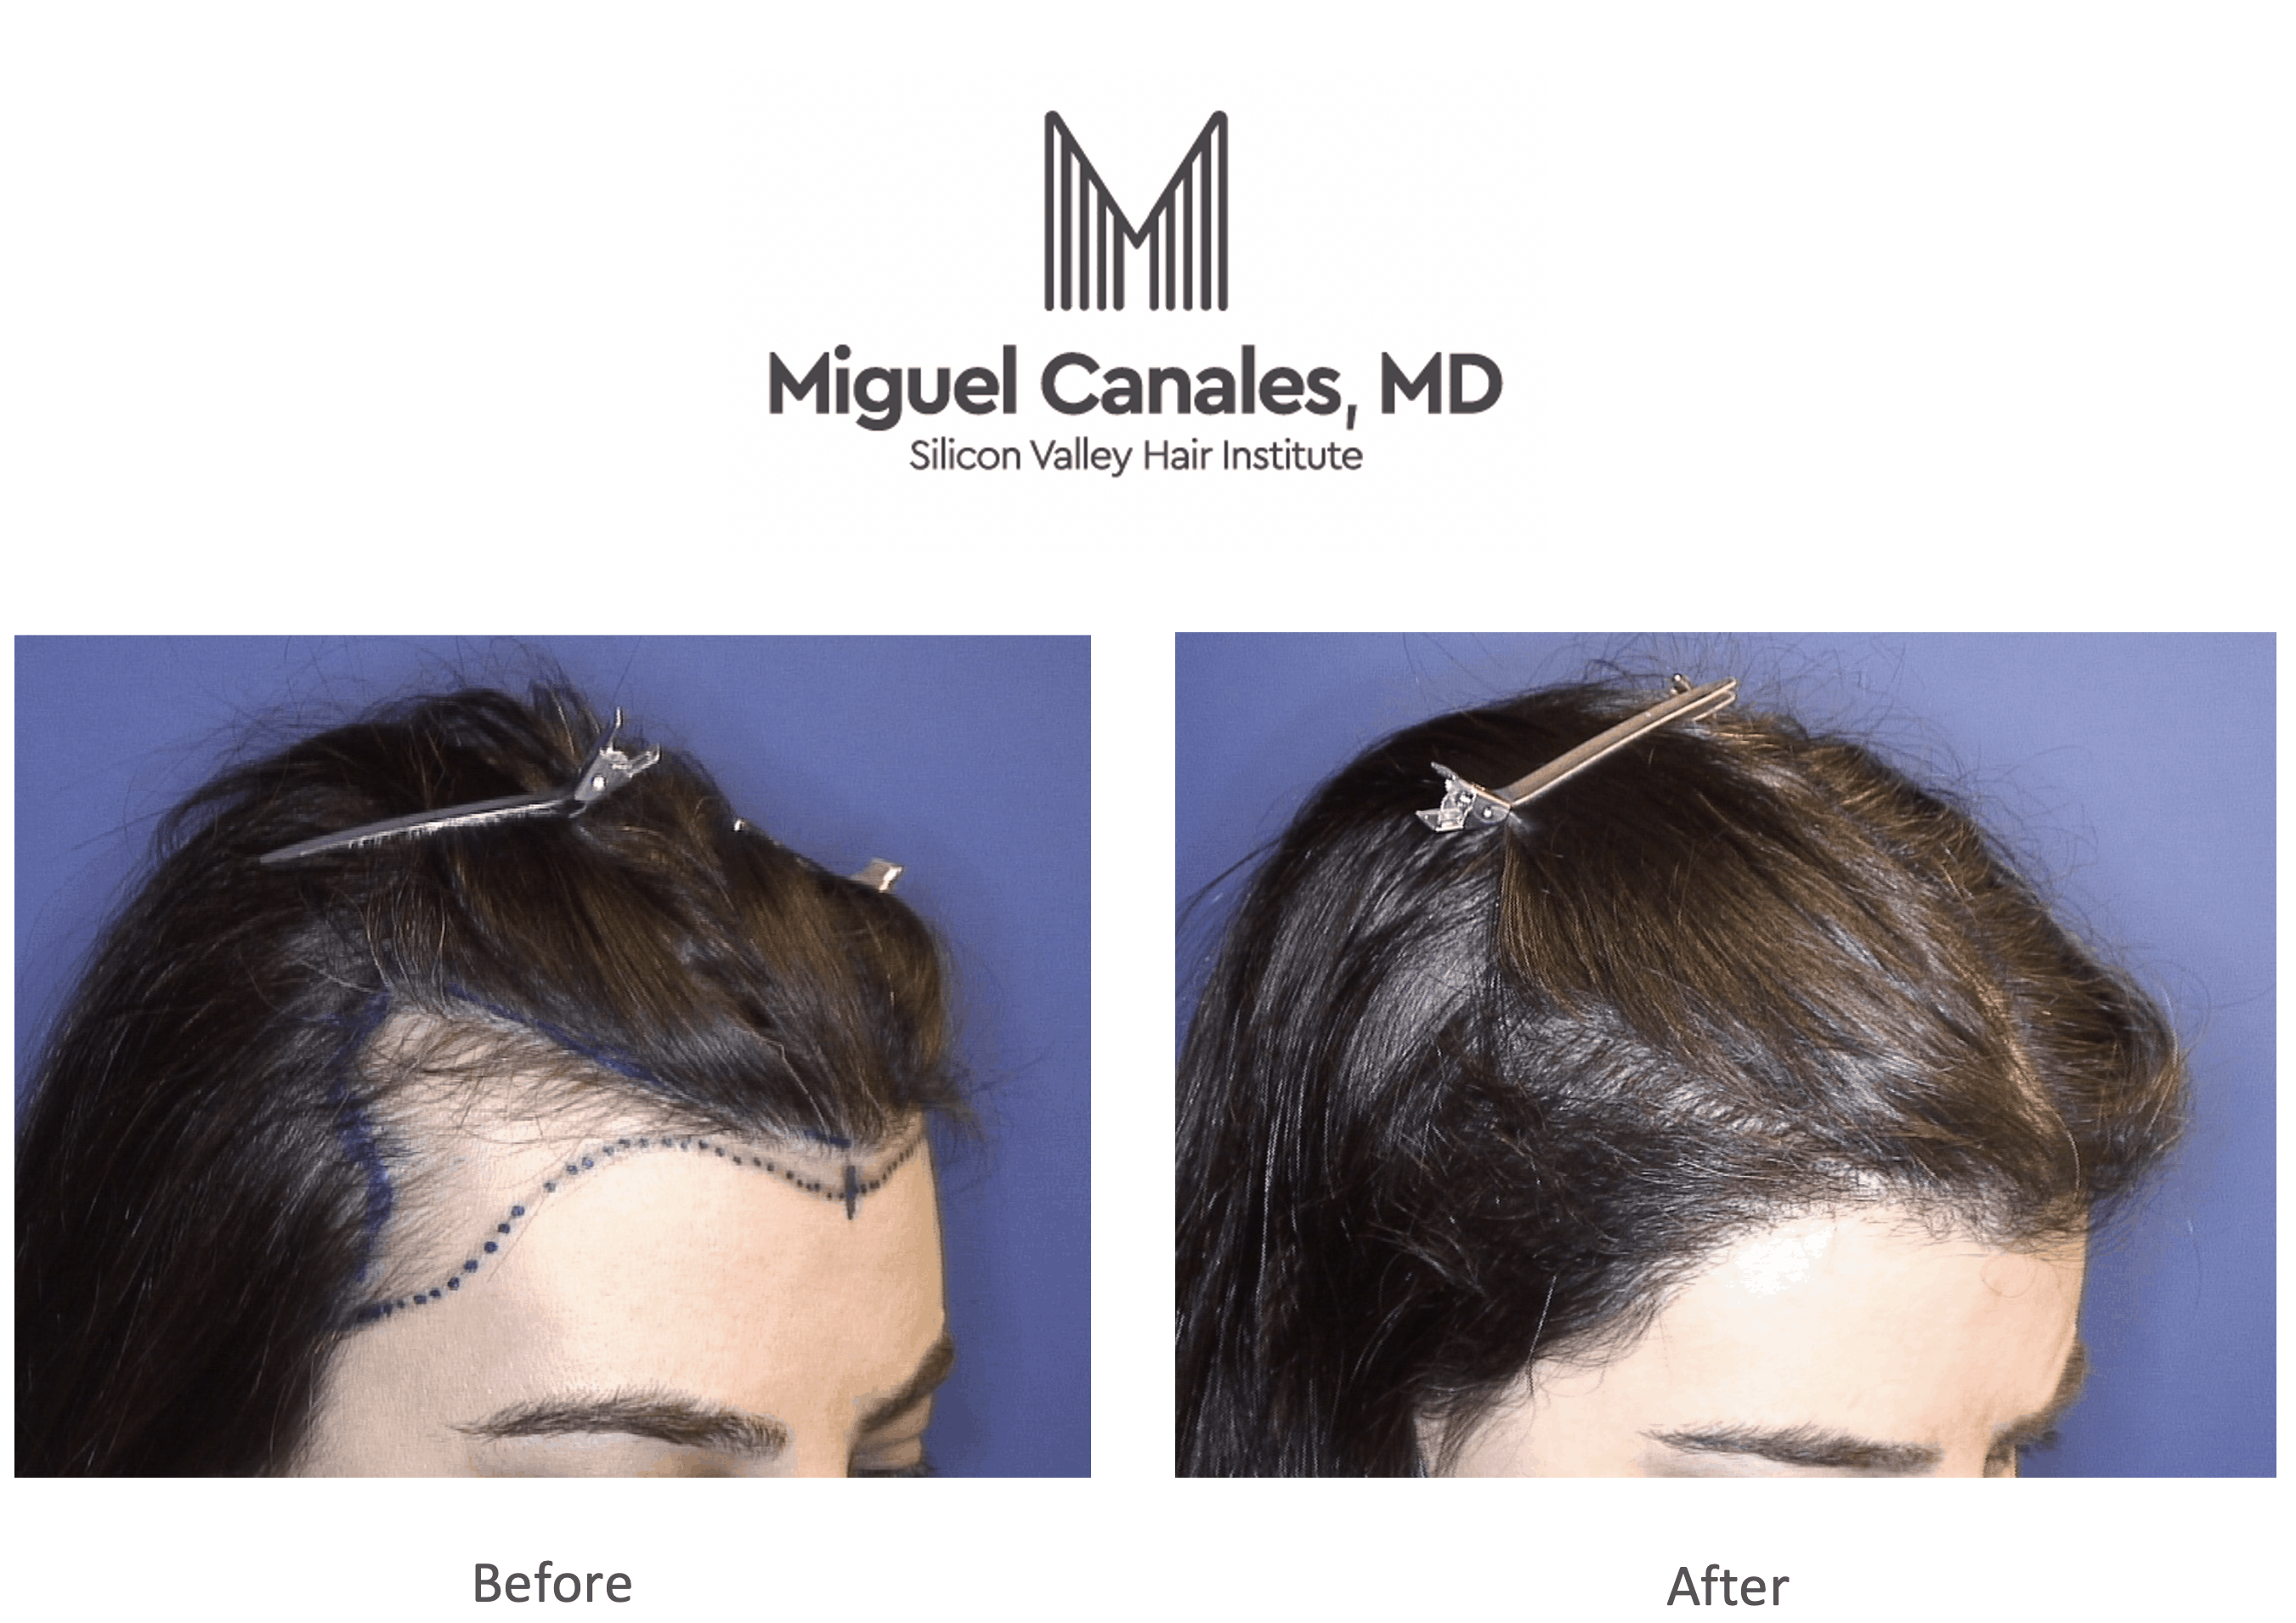 If You Are Suffering From Hair Loss, Take Comfort That You Are Not Alone -  Miguel Canales .